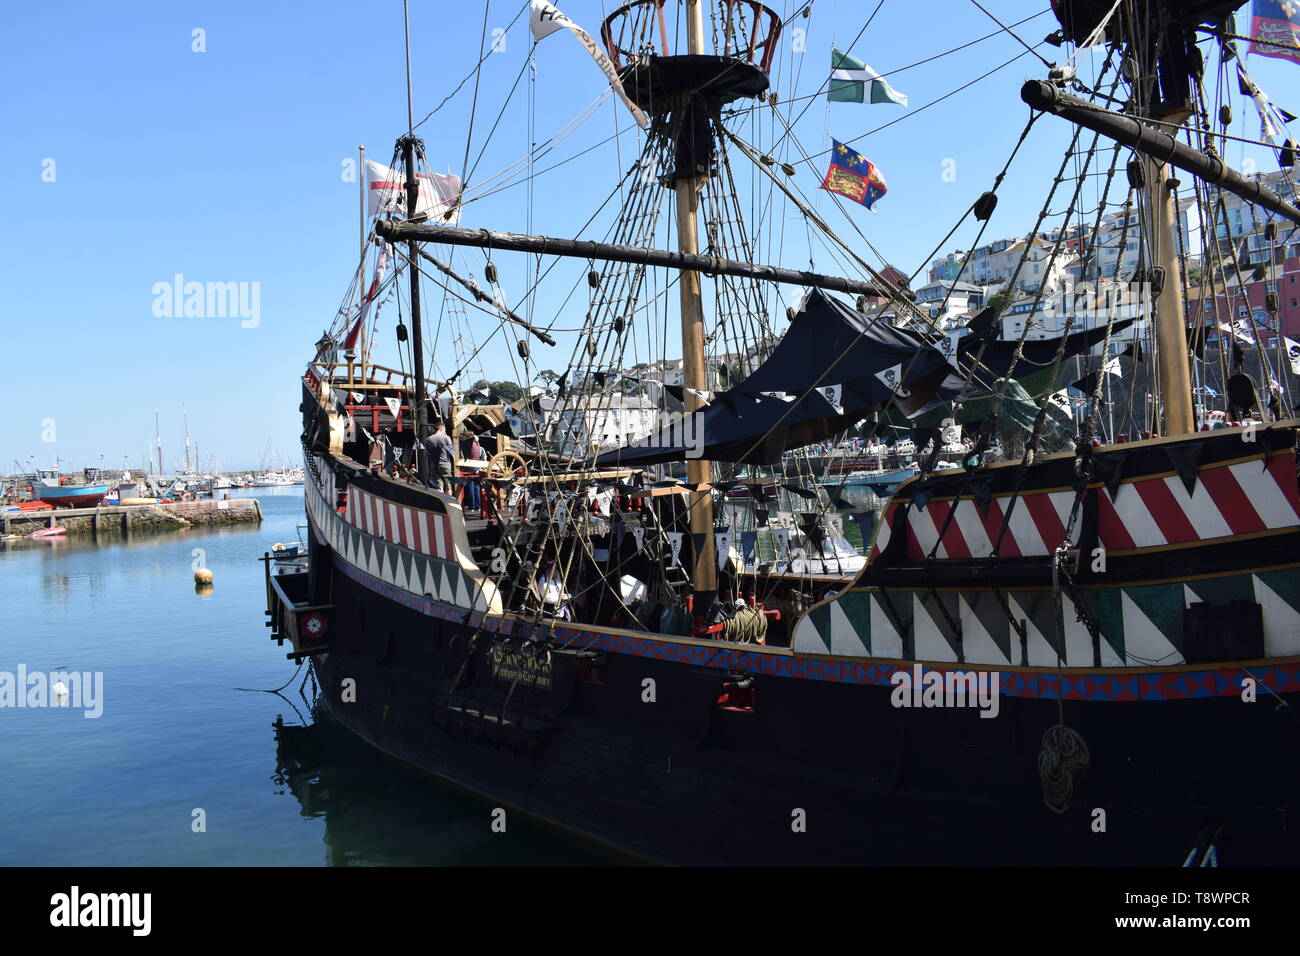 Heritage ship moored up near the shores of Torquay, Devon. Stock Photo